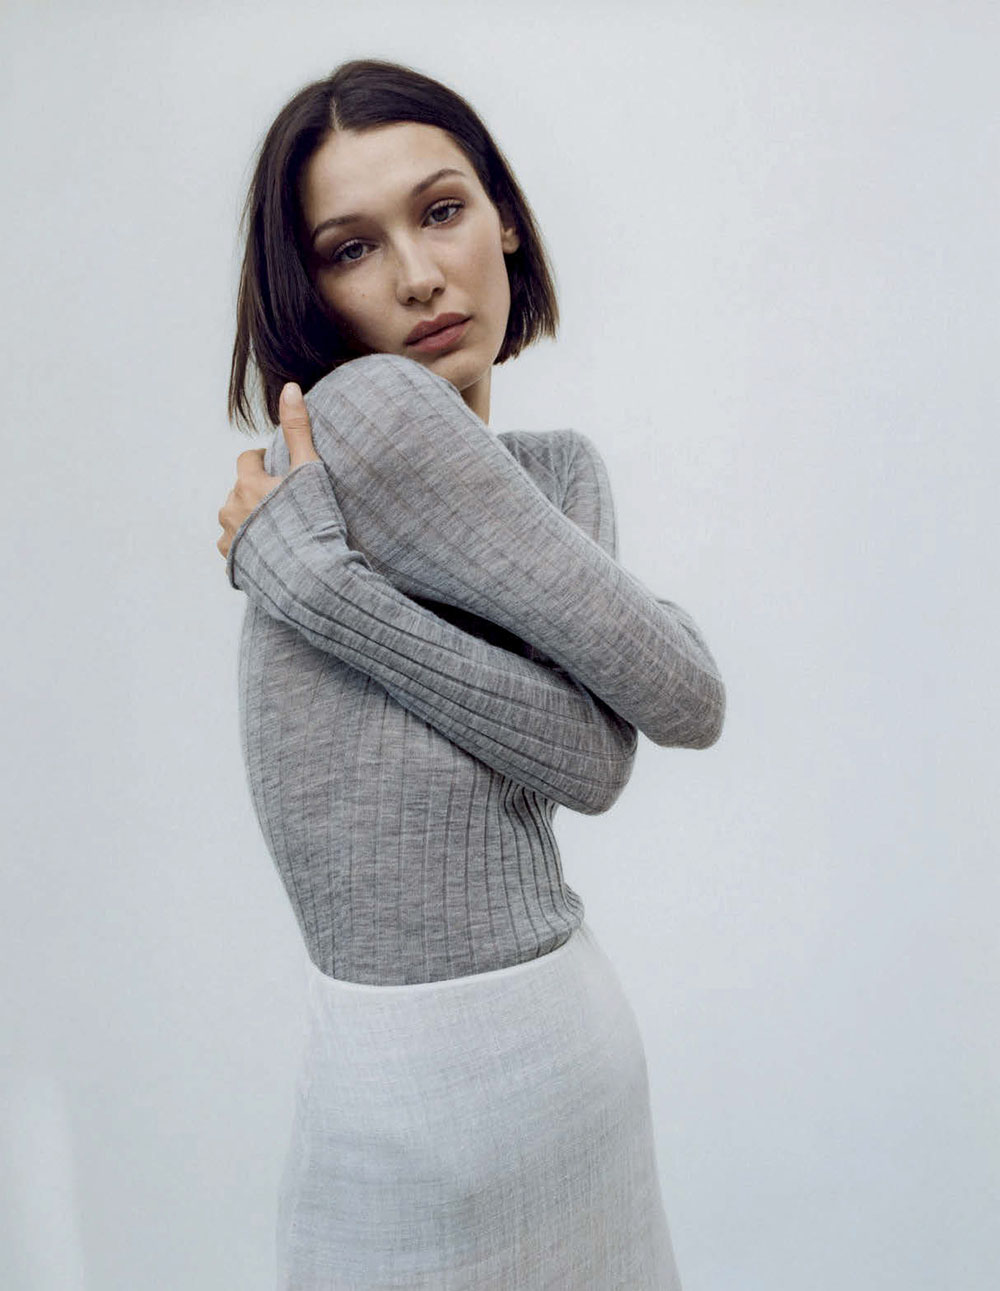 Bella Hadid by Zoë Ghertner for Vogue Italia March 2020